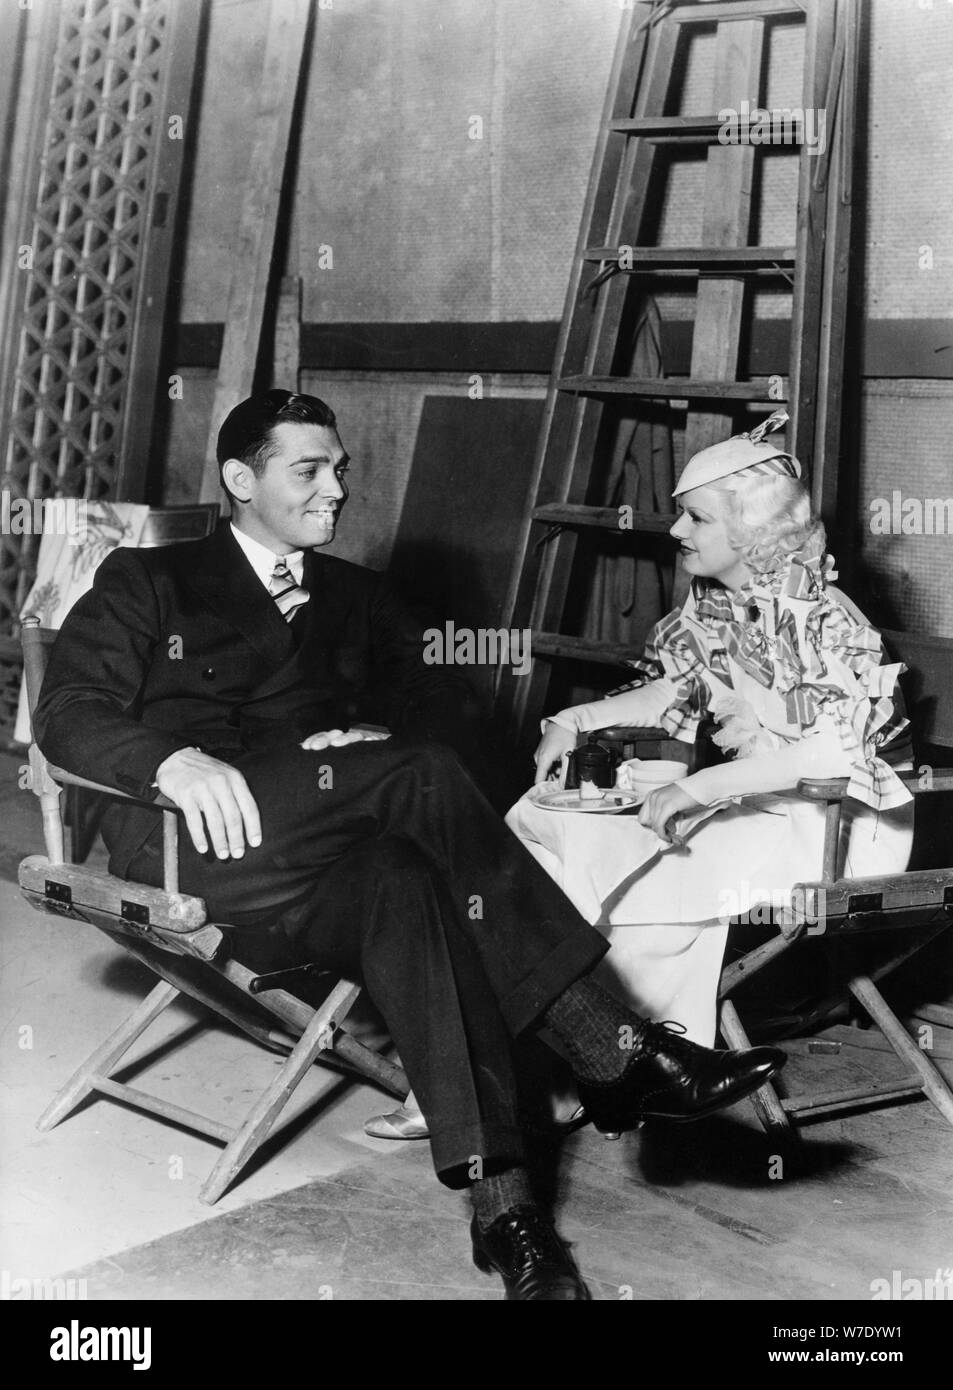 Clark Gable and Jean Harlow, American actors and film stars, 1930s. Artist:  Unknown Stock Photo - Alamy